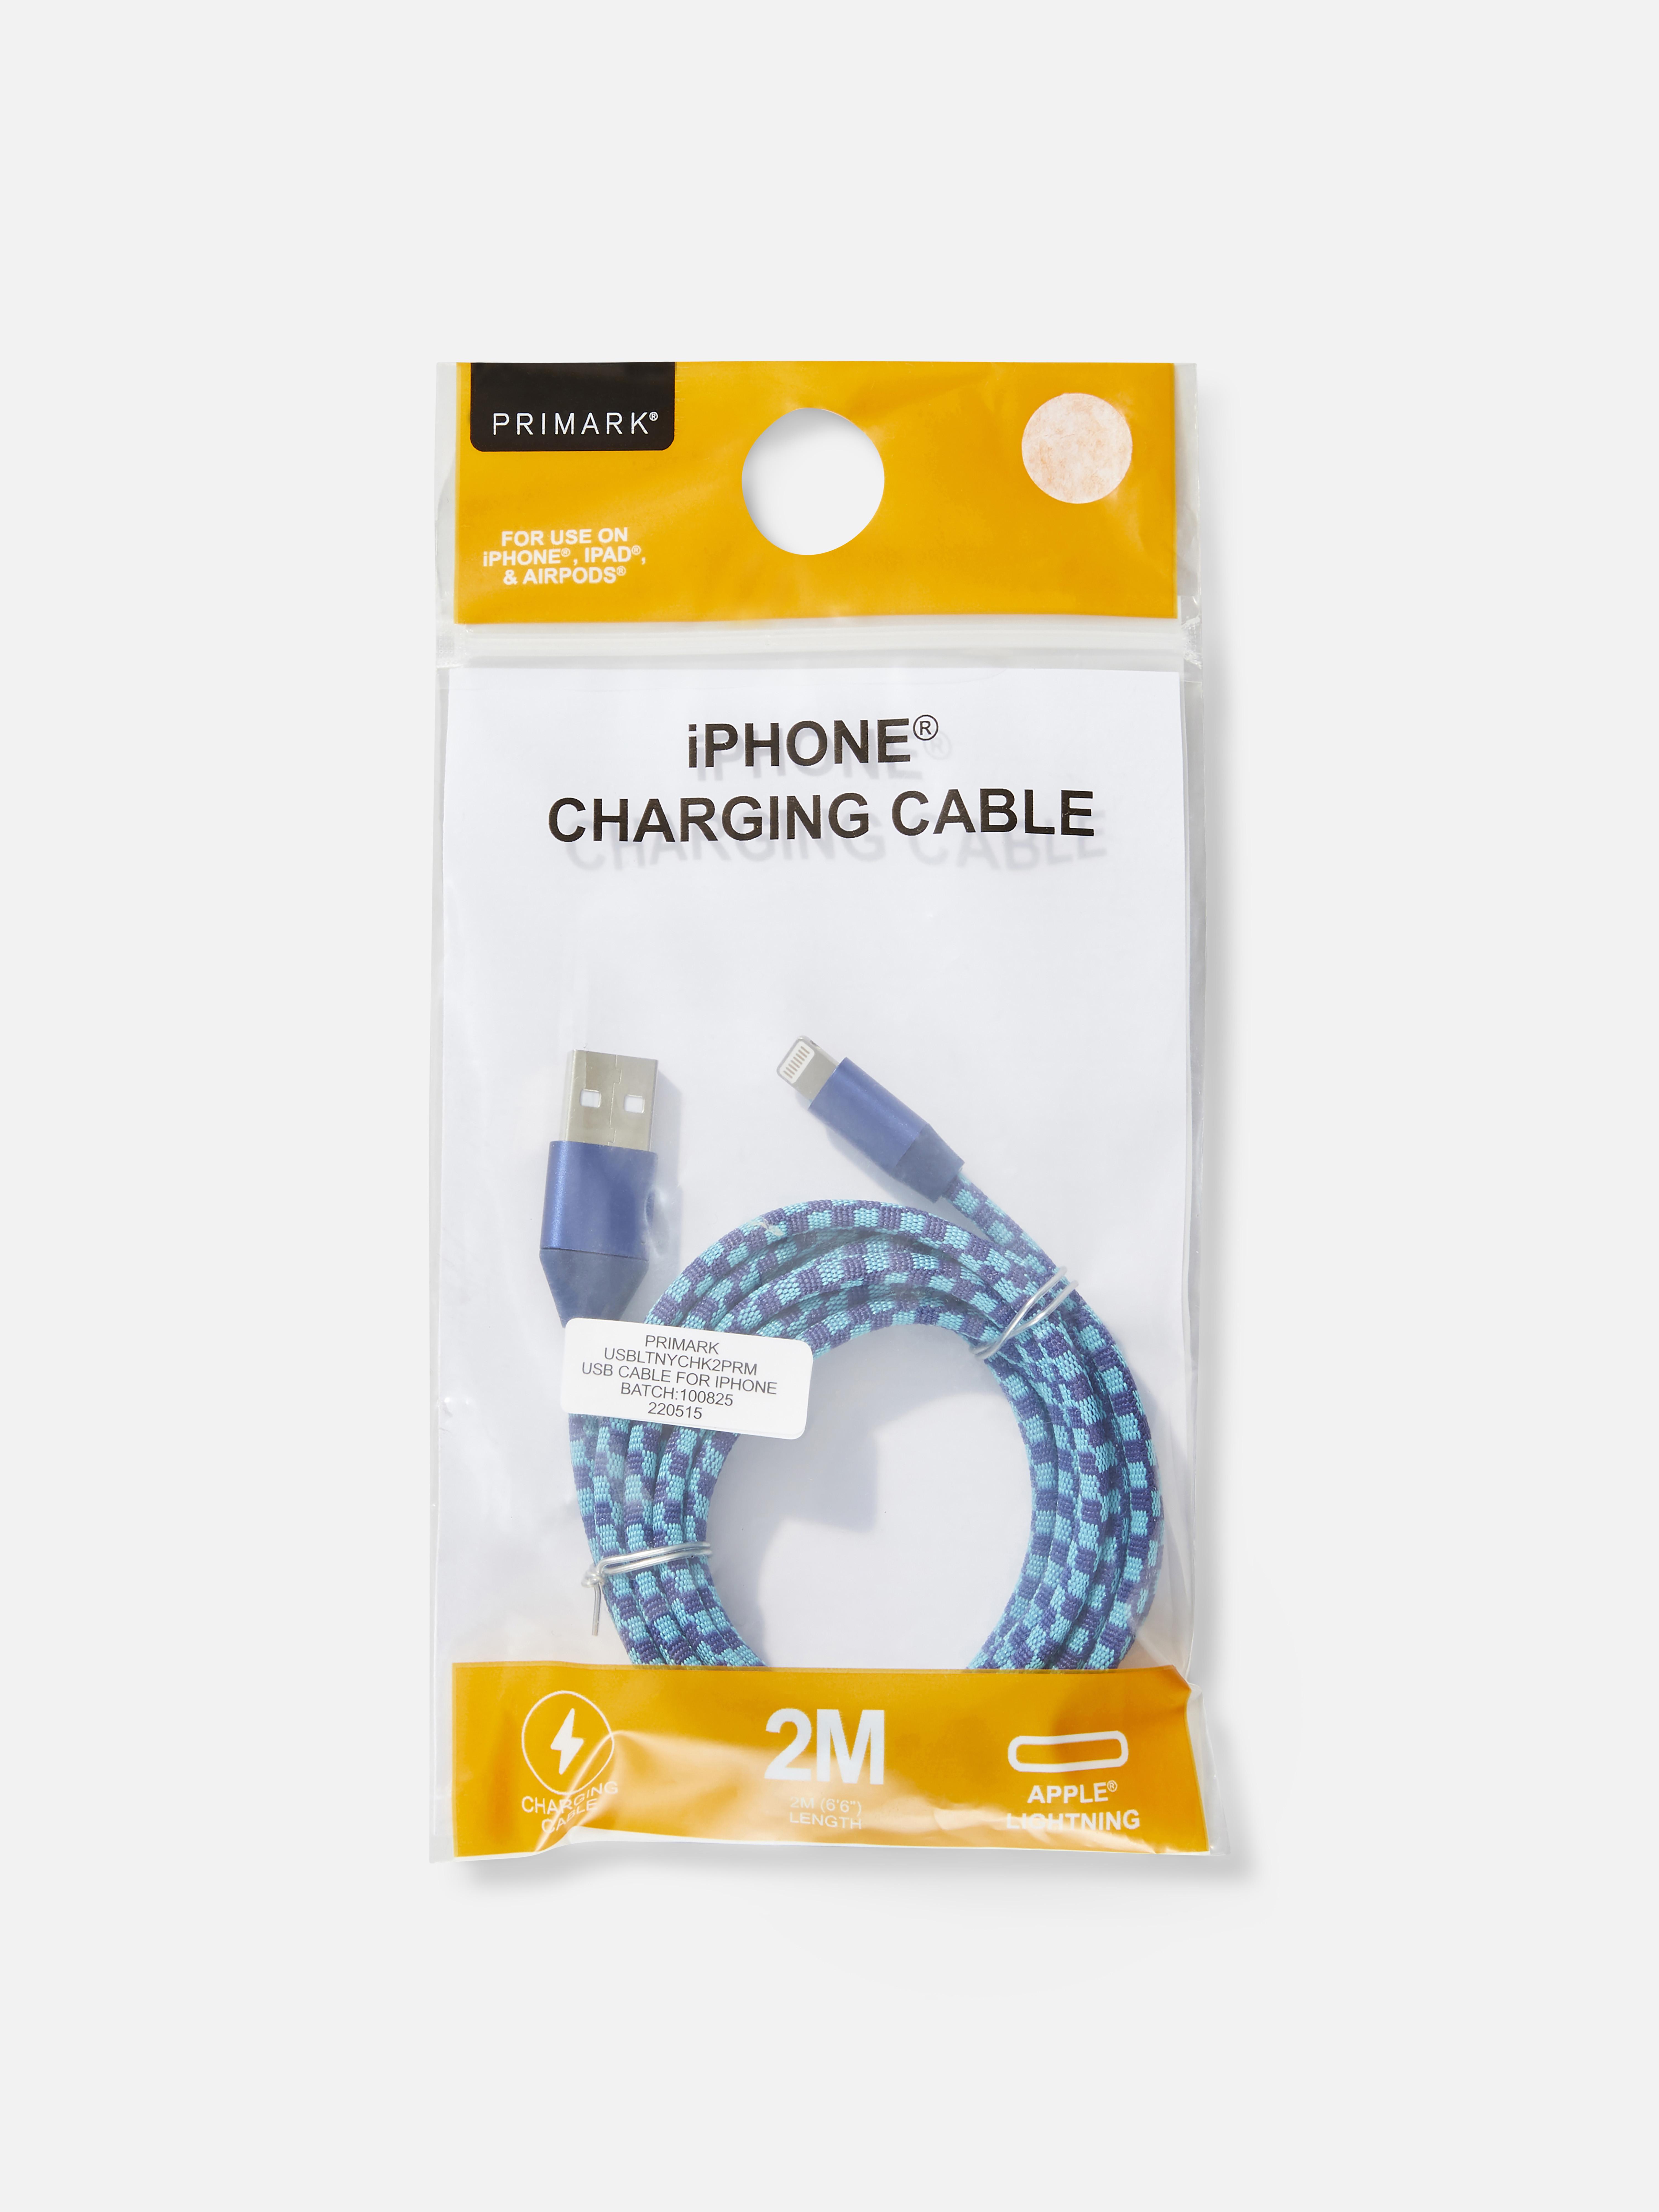 2m Single iPhone Charging Cable